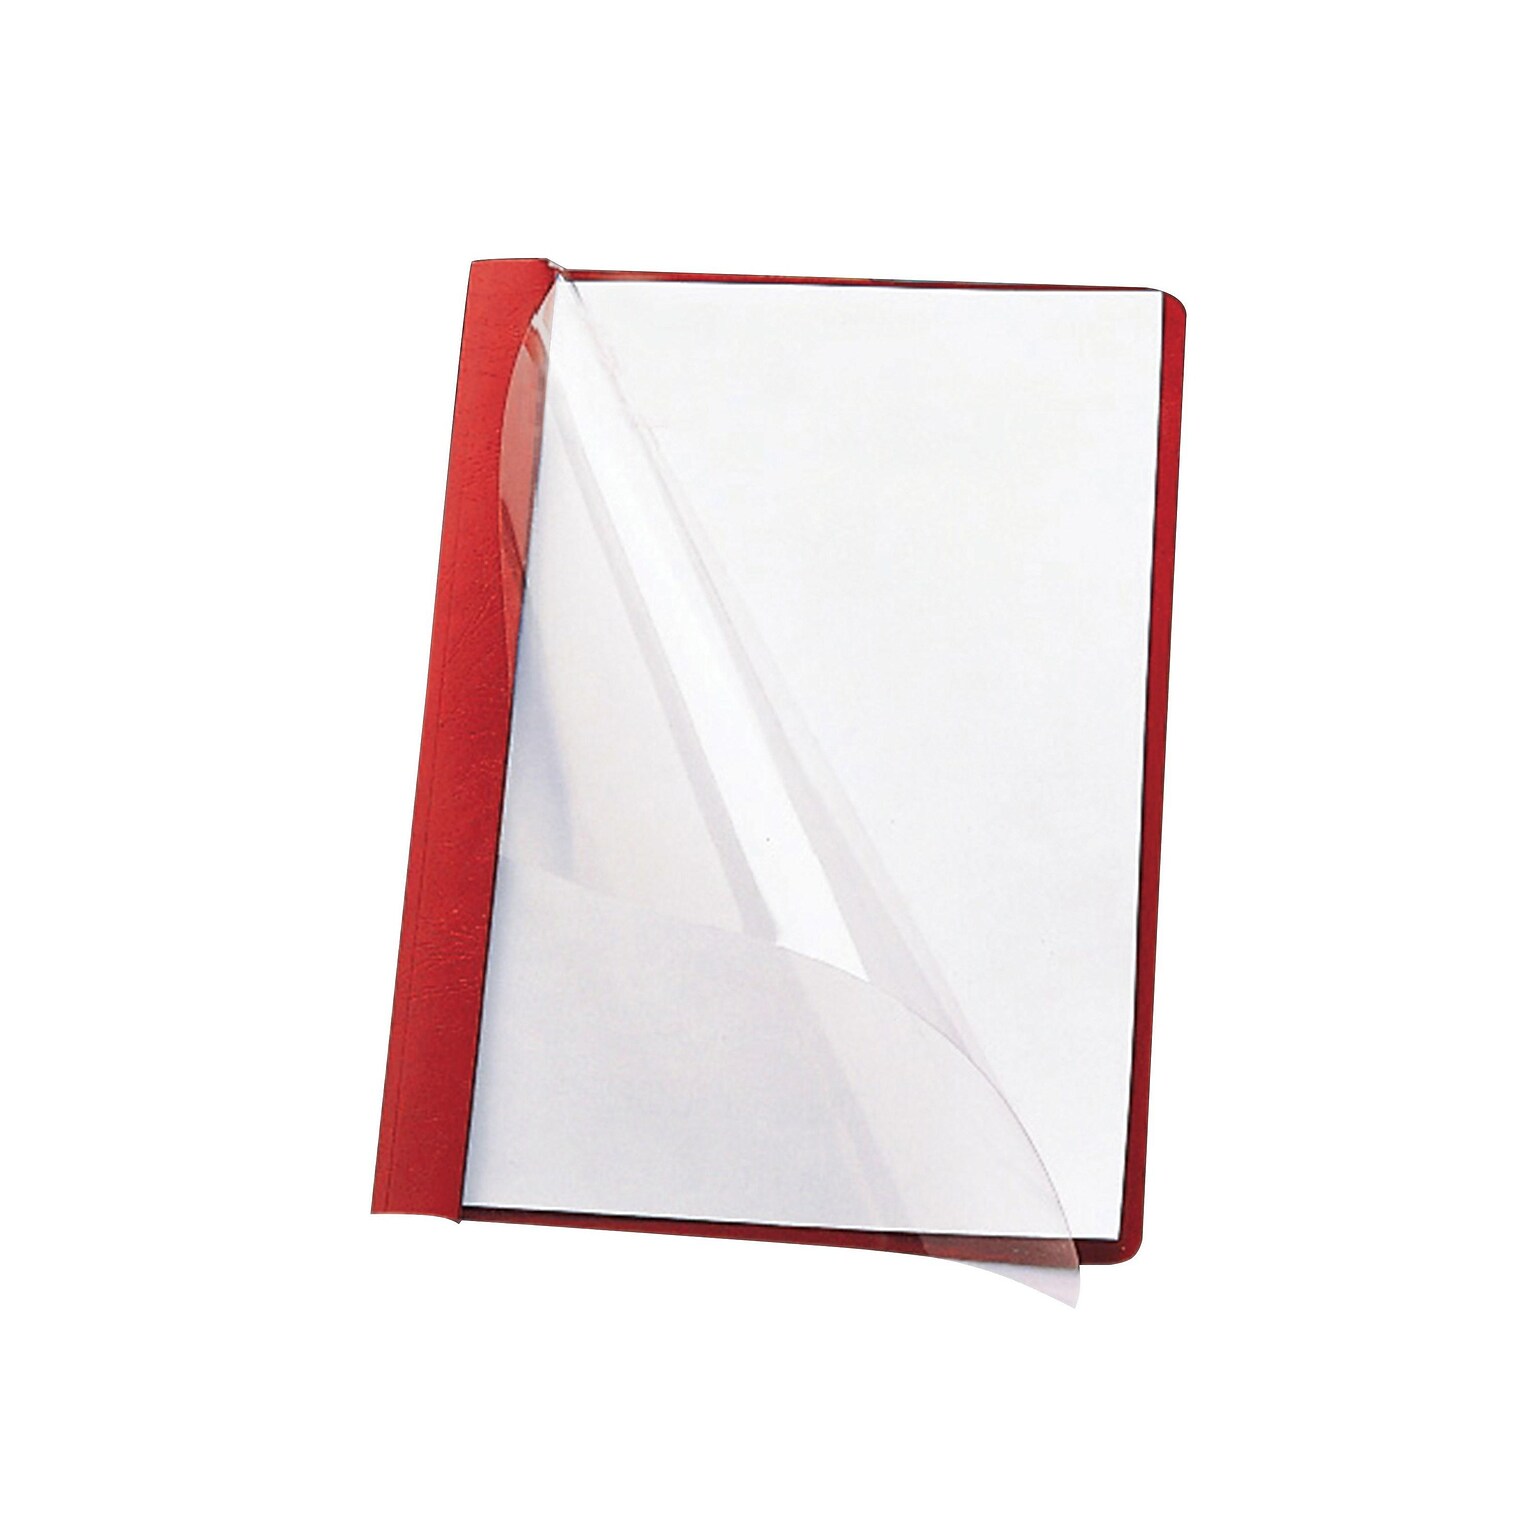 Smead Heavyweight Report Covers with Clear Front, 3-Prong, Letter Size, Red, 25/Box (87461)